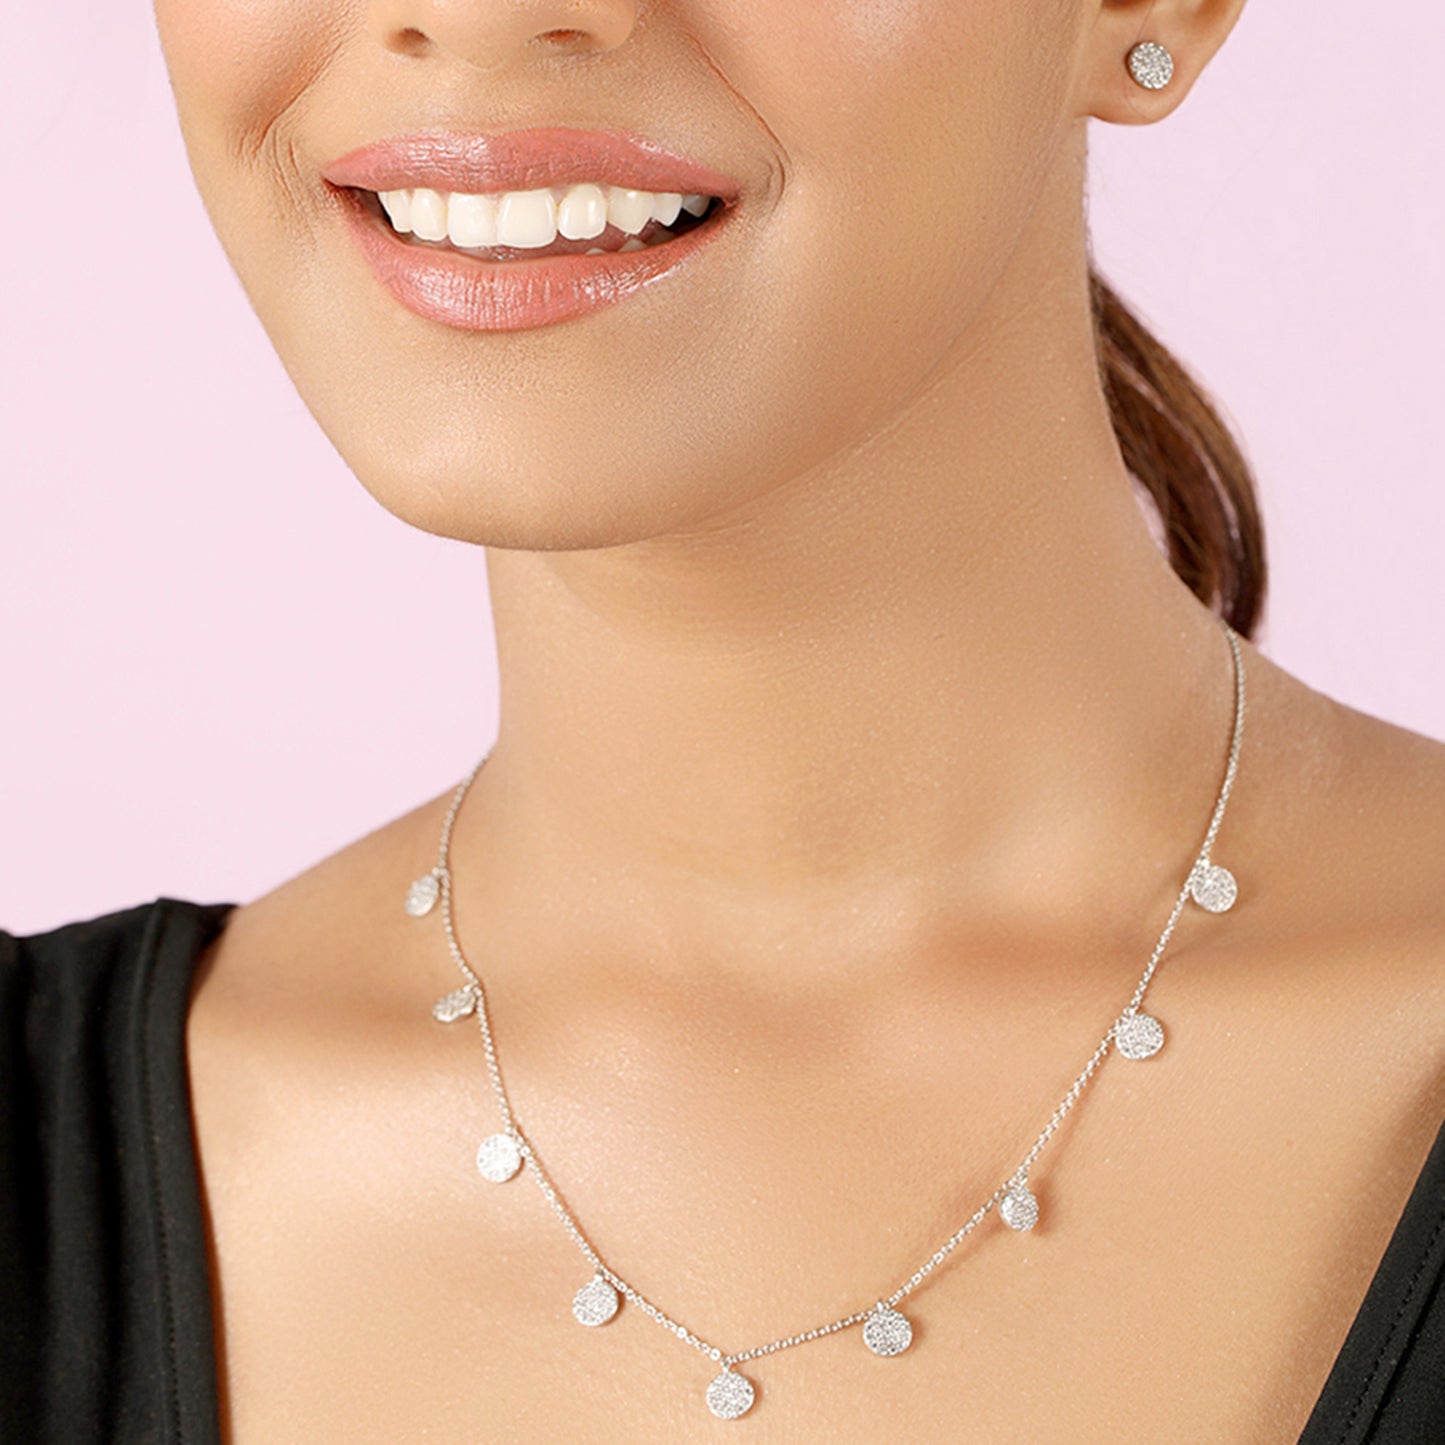 Multiple Pendent Round Neck Silver Necklace with Earrings